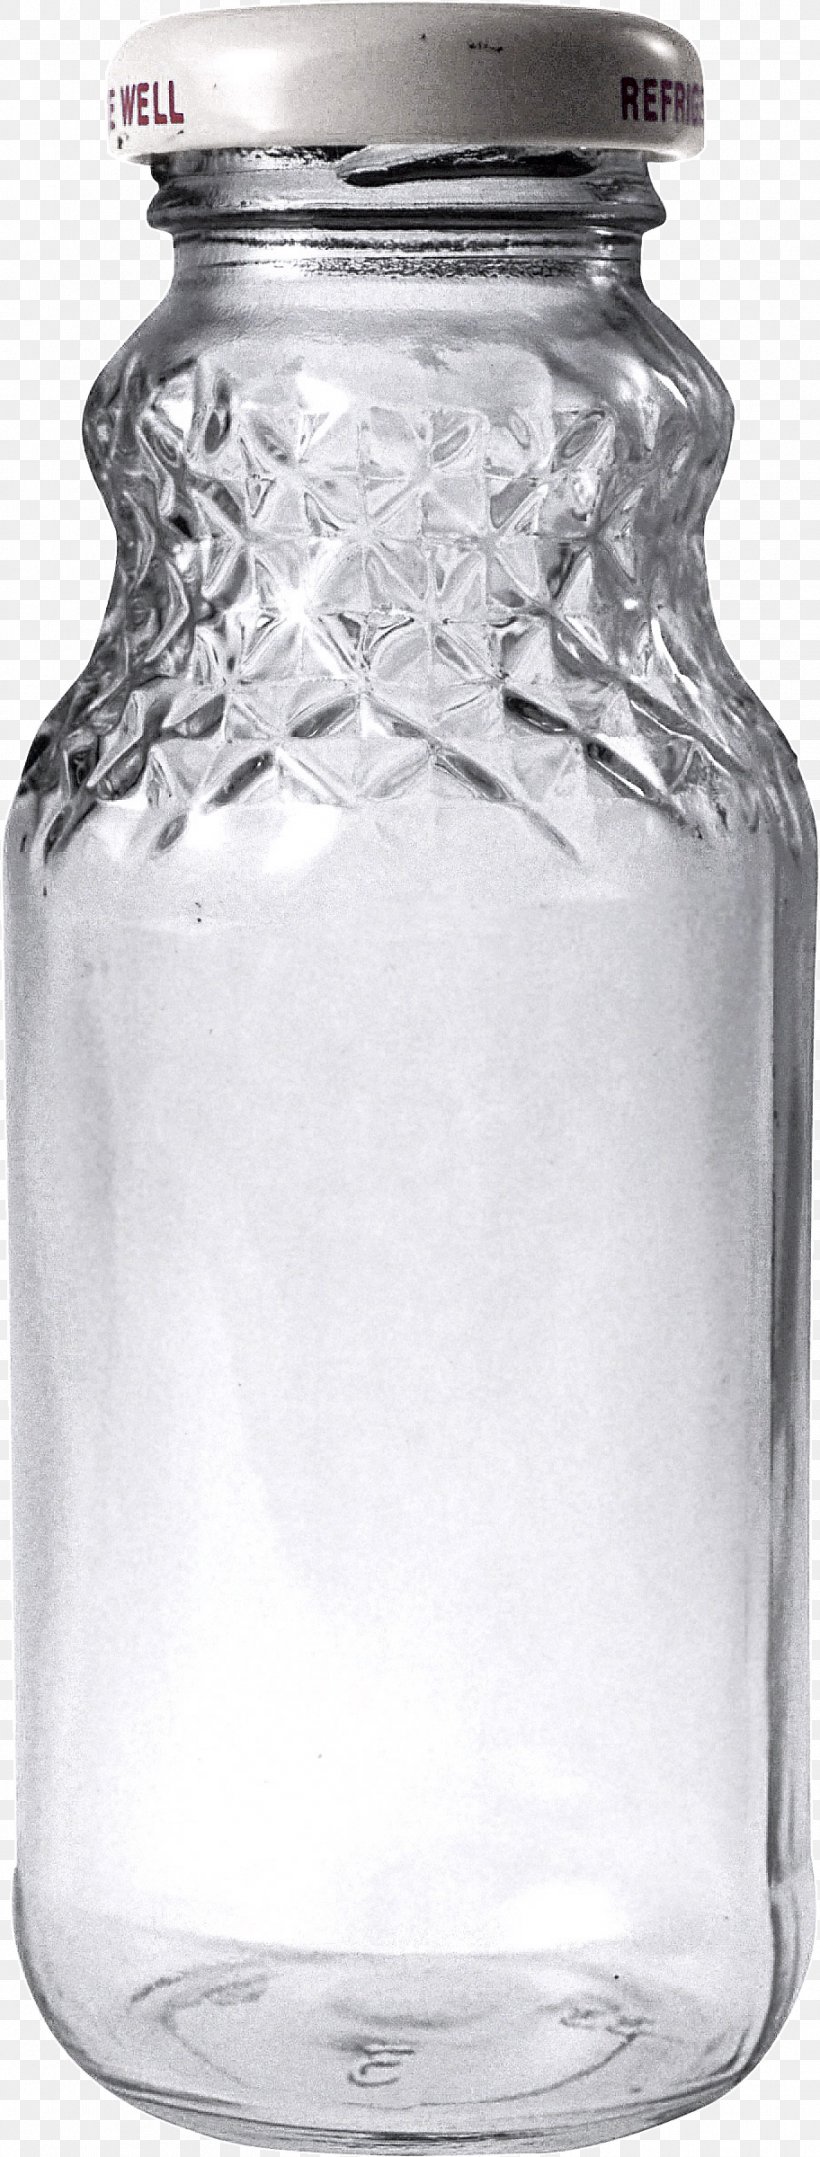 Juice Glass Bottle Glass Bottle, PNG, 912x2400px, Bottle, Black And White, Container, Drink, Drinkware Download Free